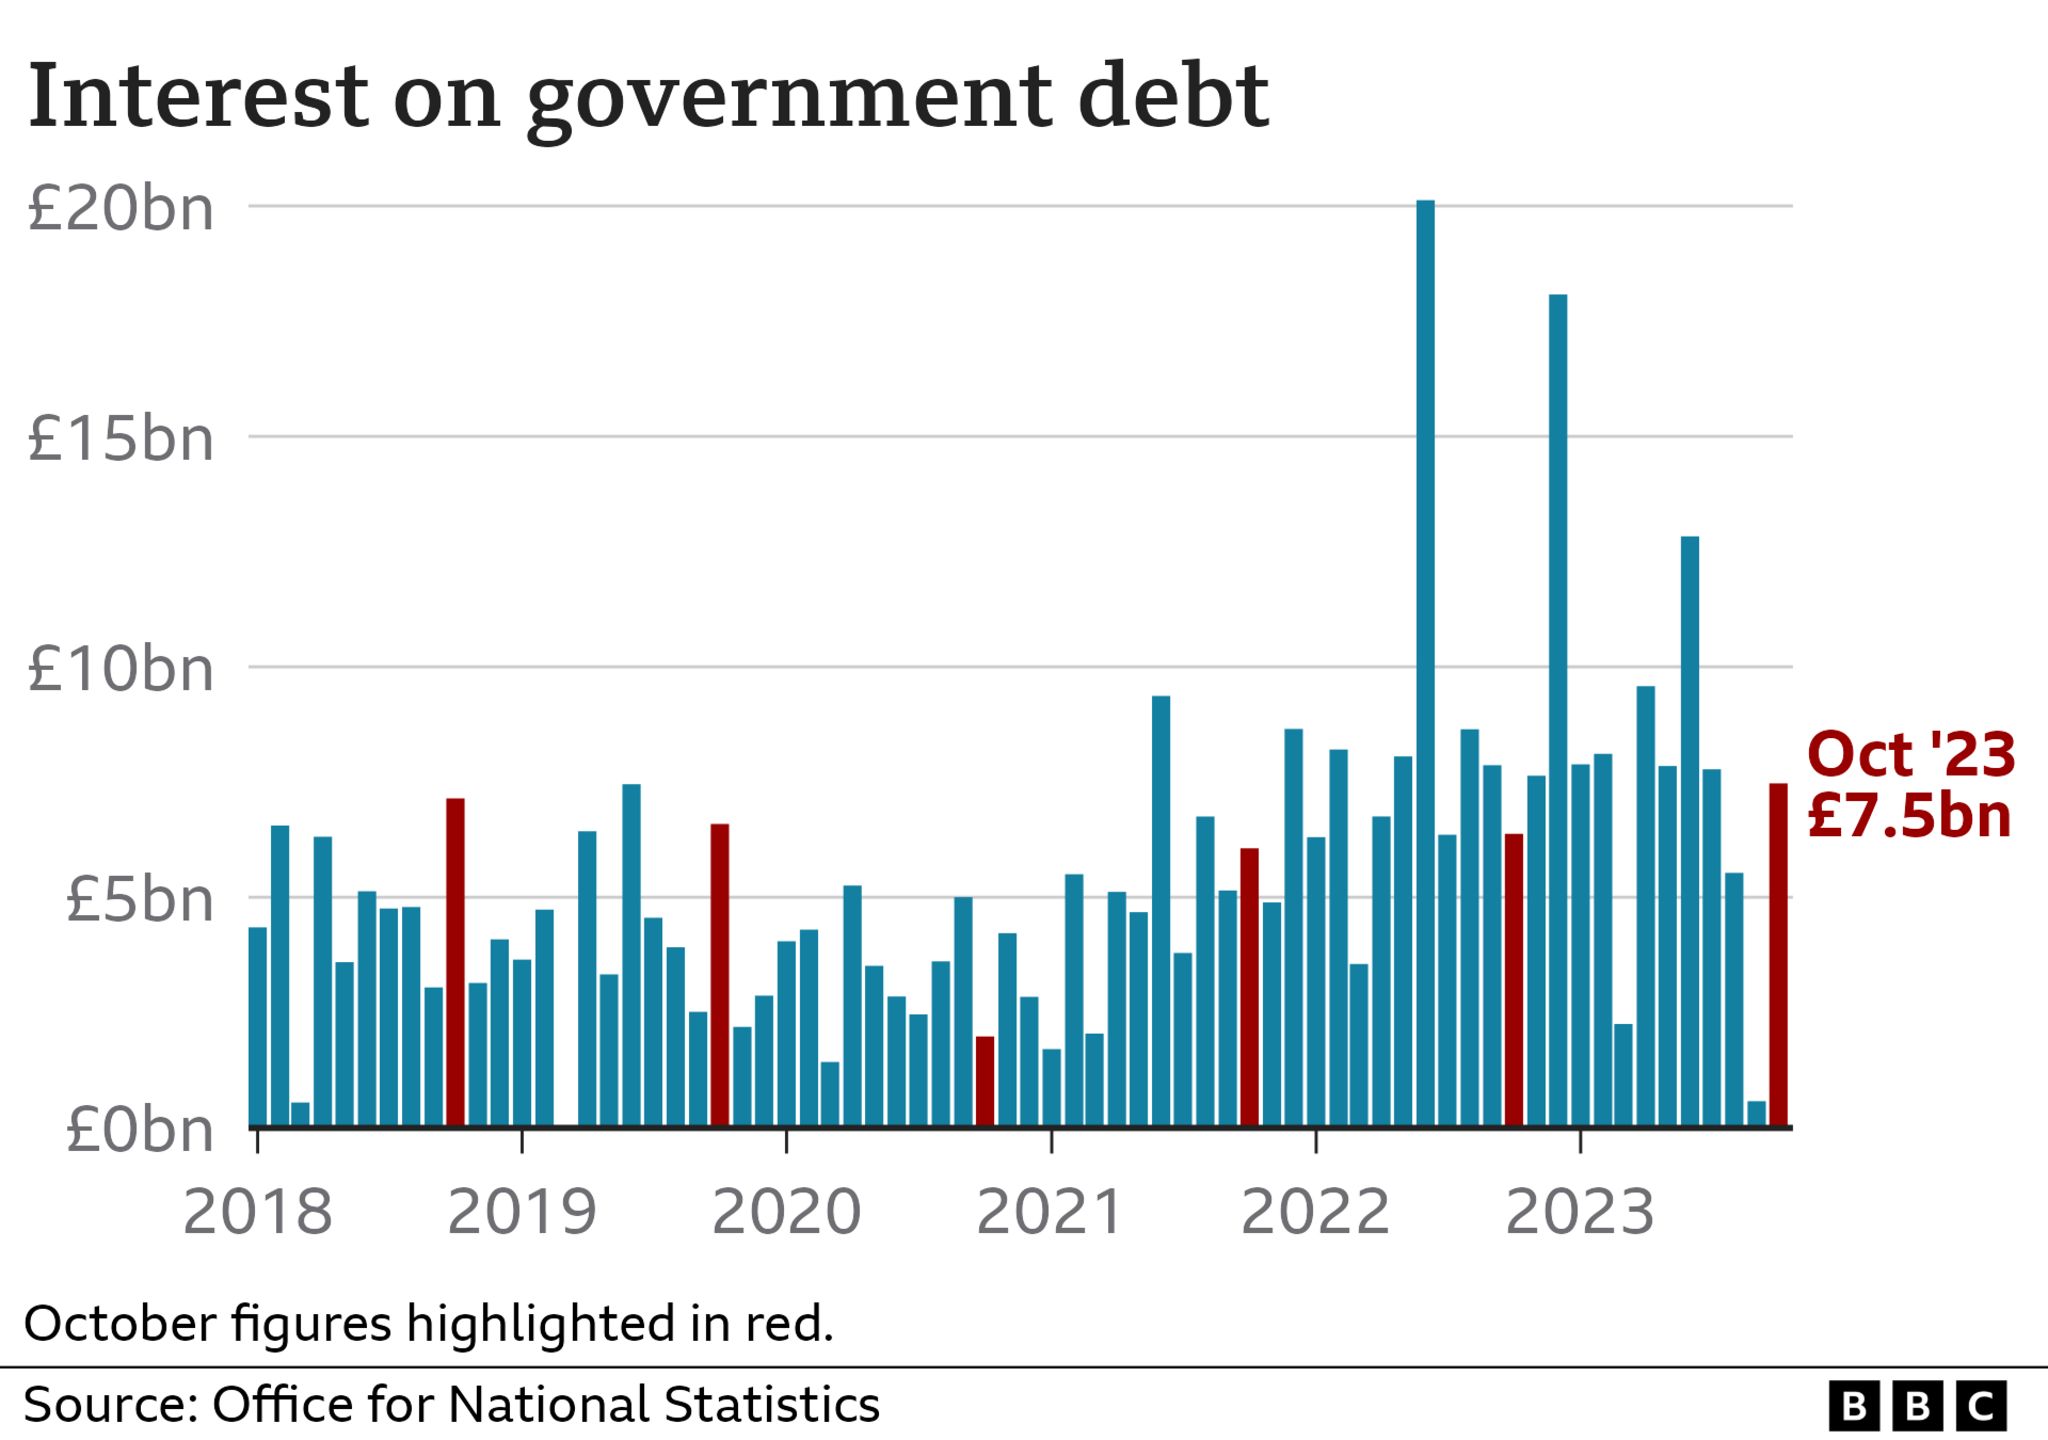 Bar chart showing interest on UK government debt was £7.5bn in October 2023